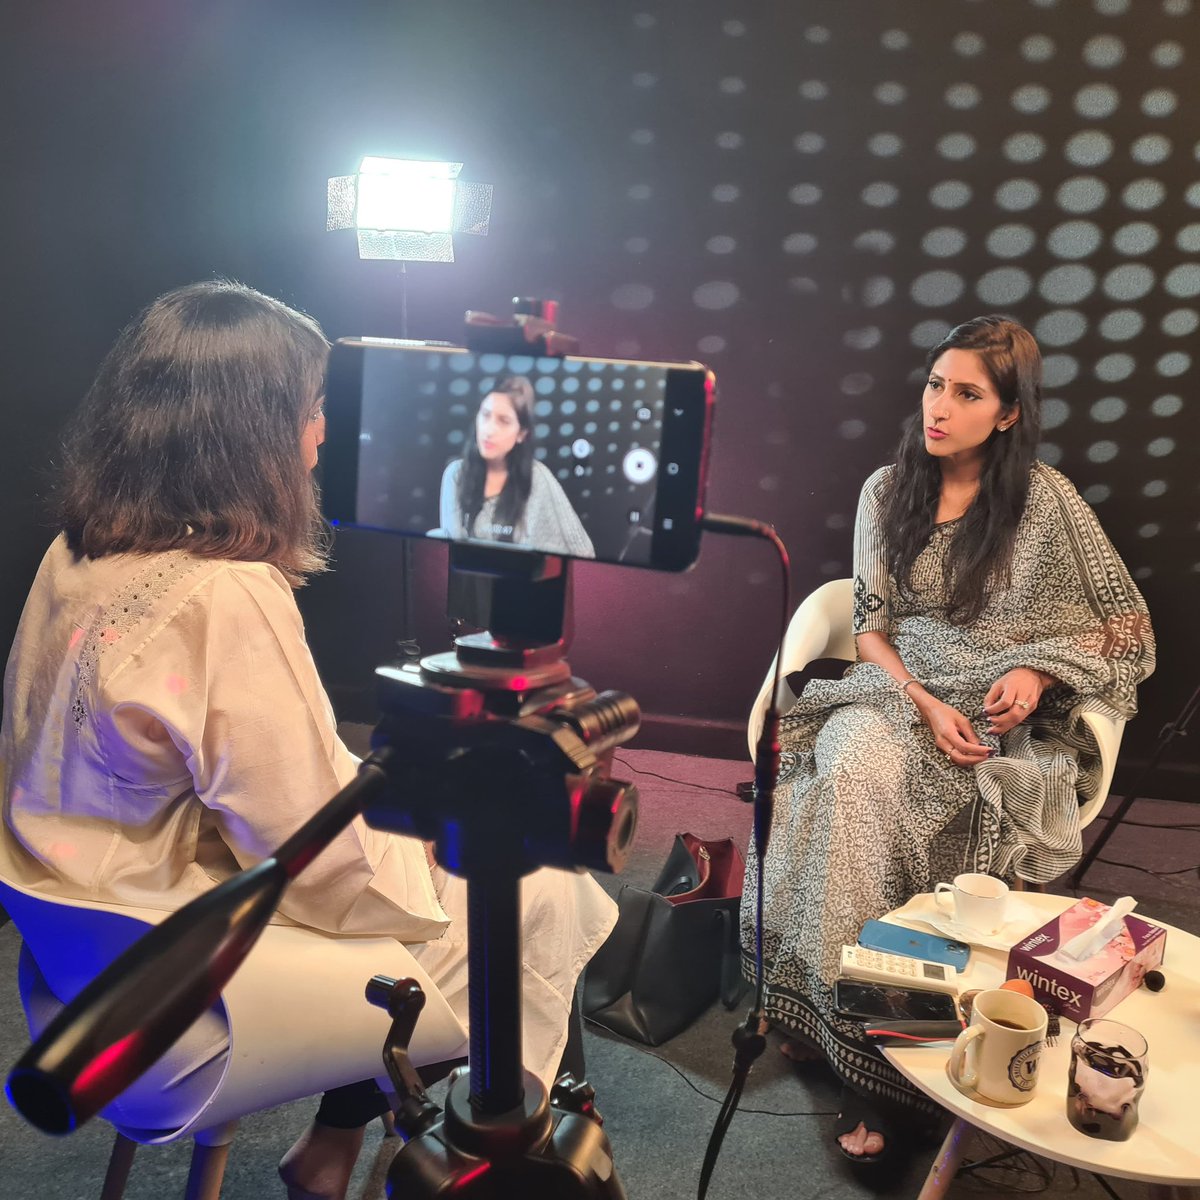 Super excited for this one to air with the one and only @BDUTT @themojostory #BTS